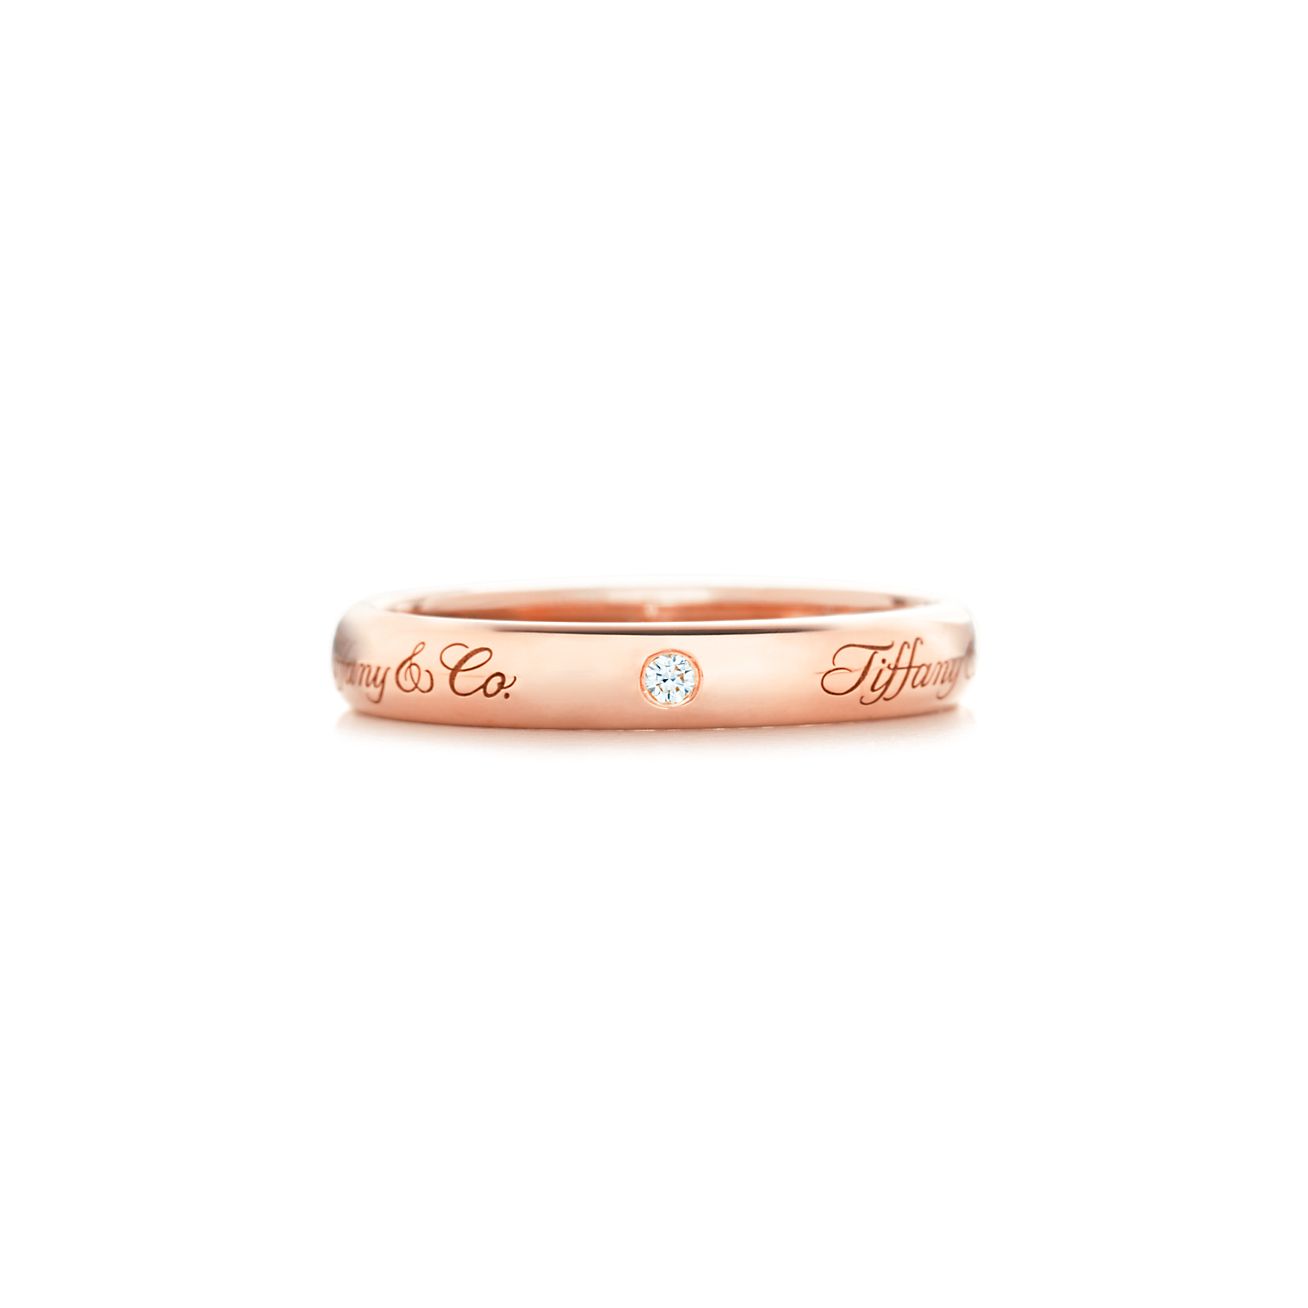 Tiffany Notes™ ring in 18k rose gold 